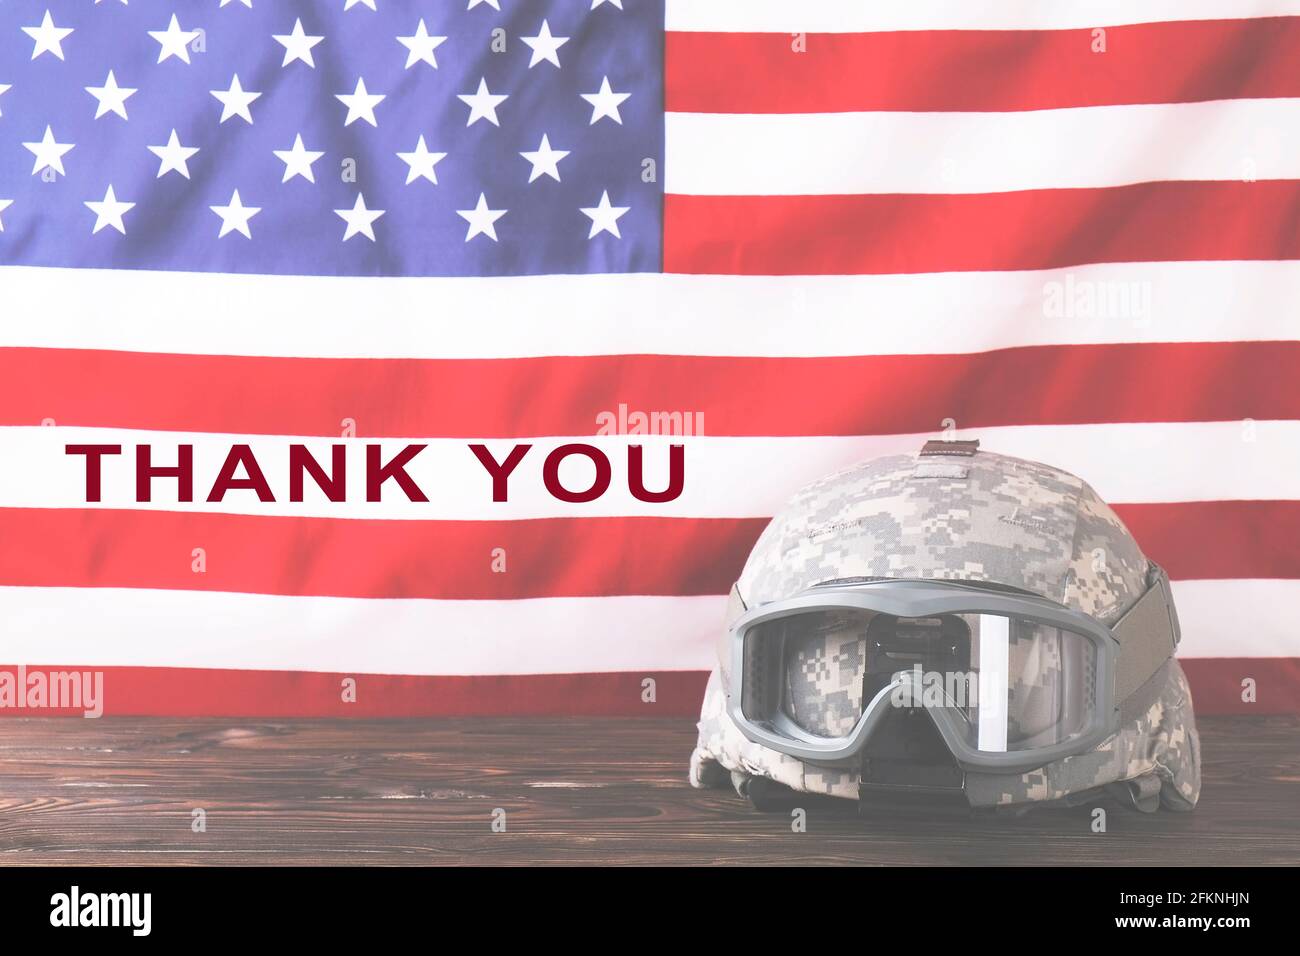 Thank you text. US Army kevlar combat helmet, camo cover, tactical goggles, USA flag background. Memorial day weekend, United States of America armed Stock Photo